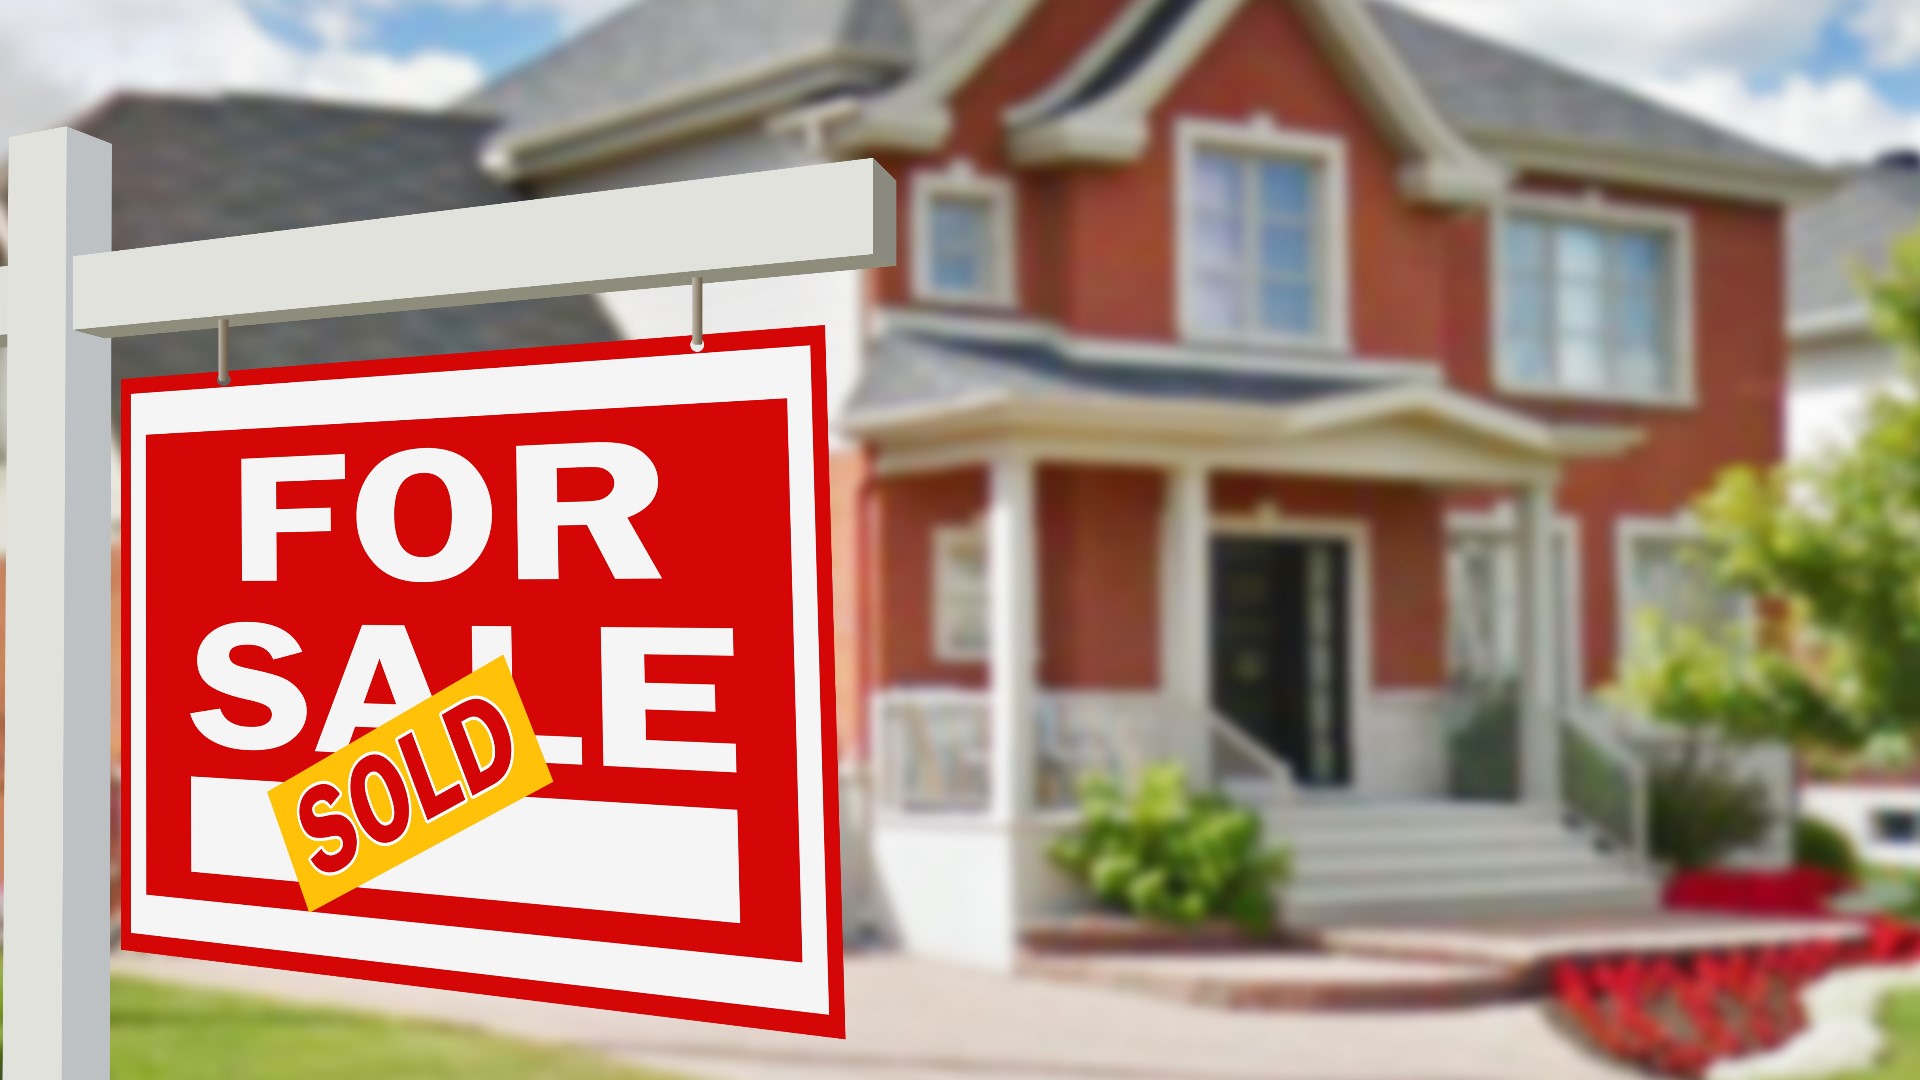 Realtor.com said in 2022, people will want to sell. A growing number of homeowners plan to list their houses in the next 12 months.